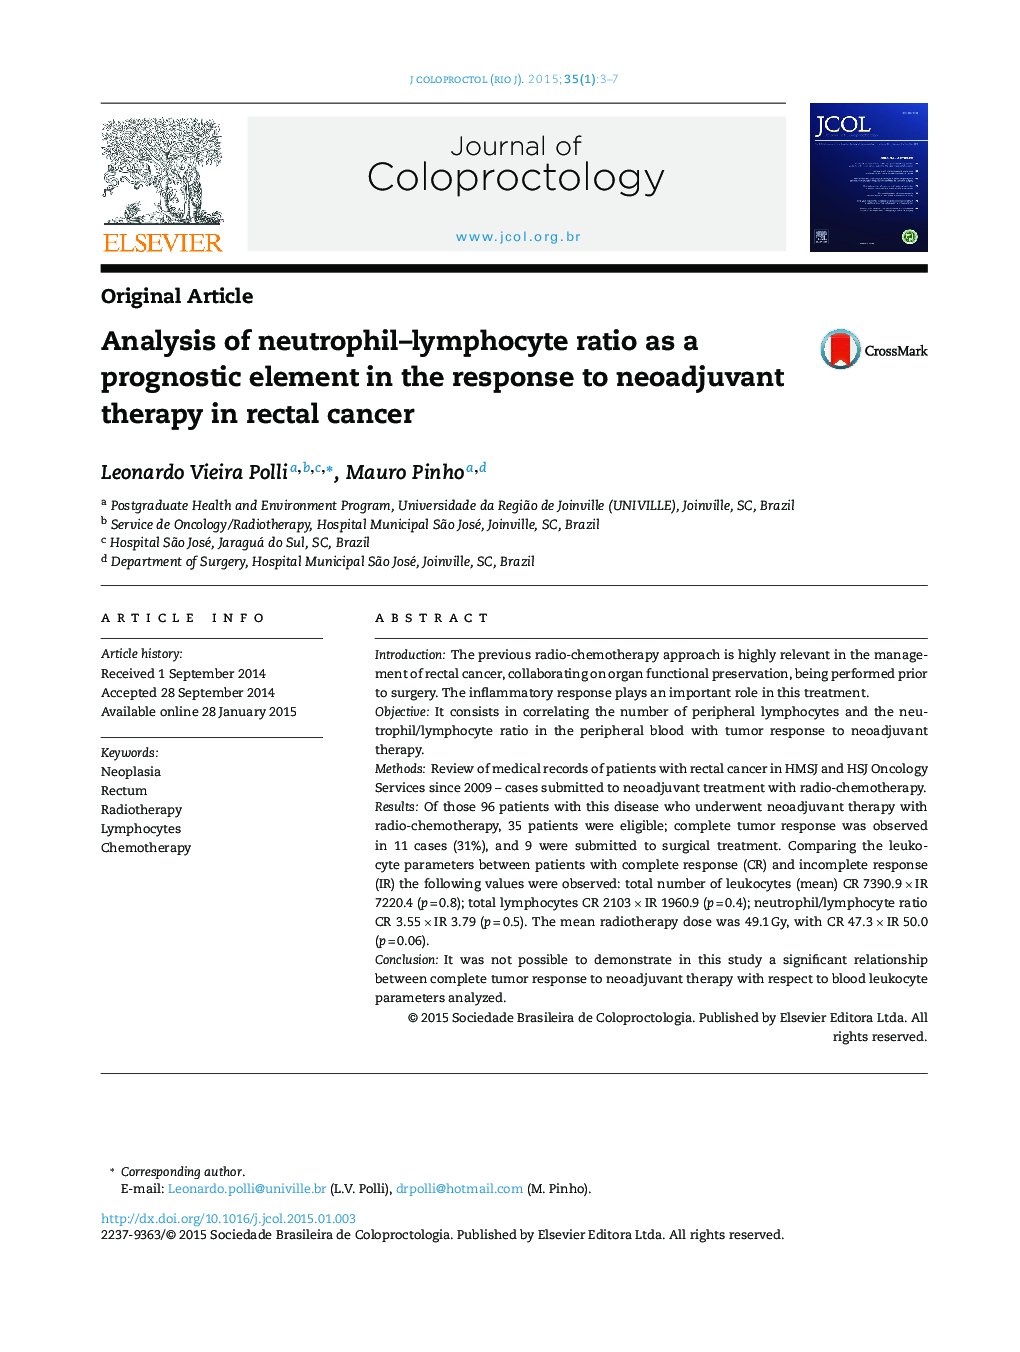 Analysis of neutrophil–lymphocyte ratio as a prognostic element in the response to neoadjuvant therapy in rectal cancer